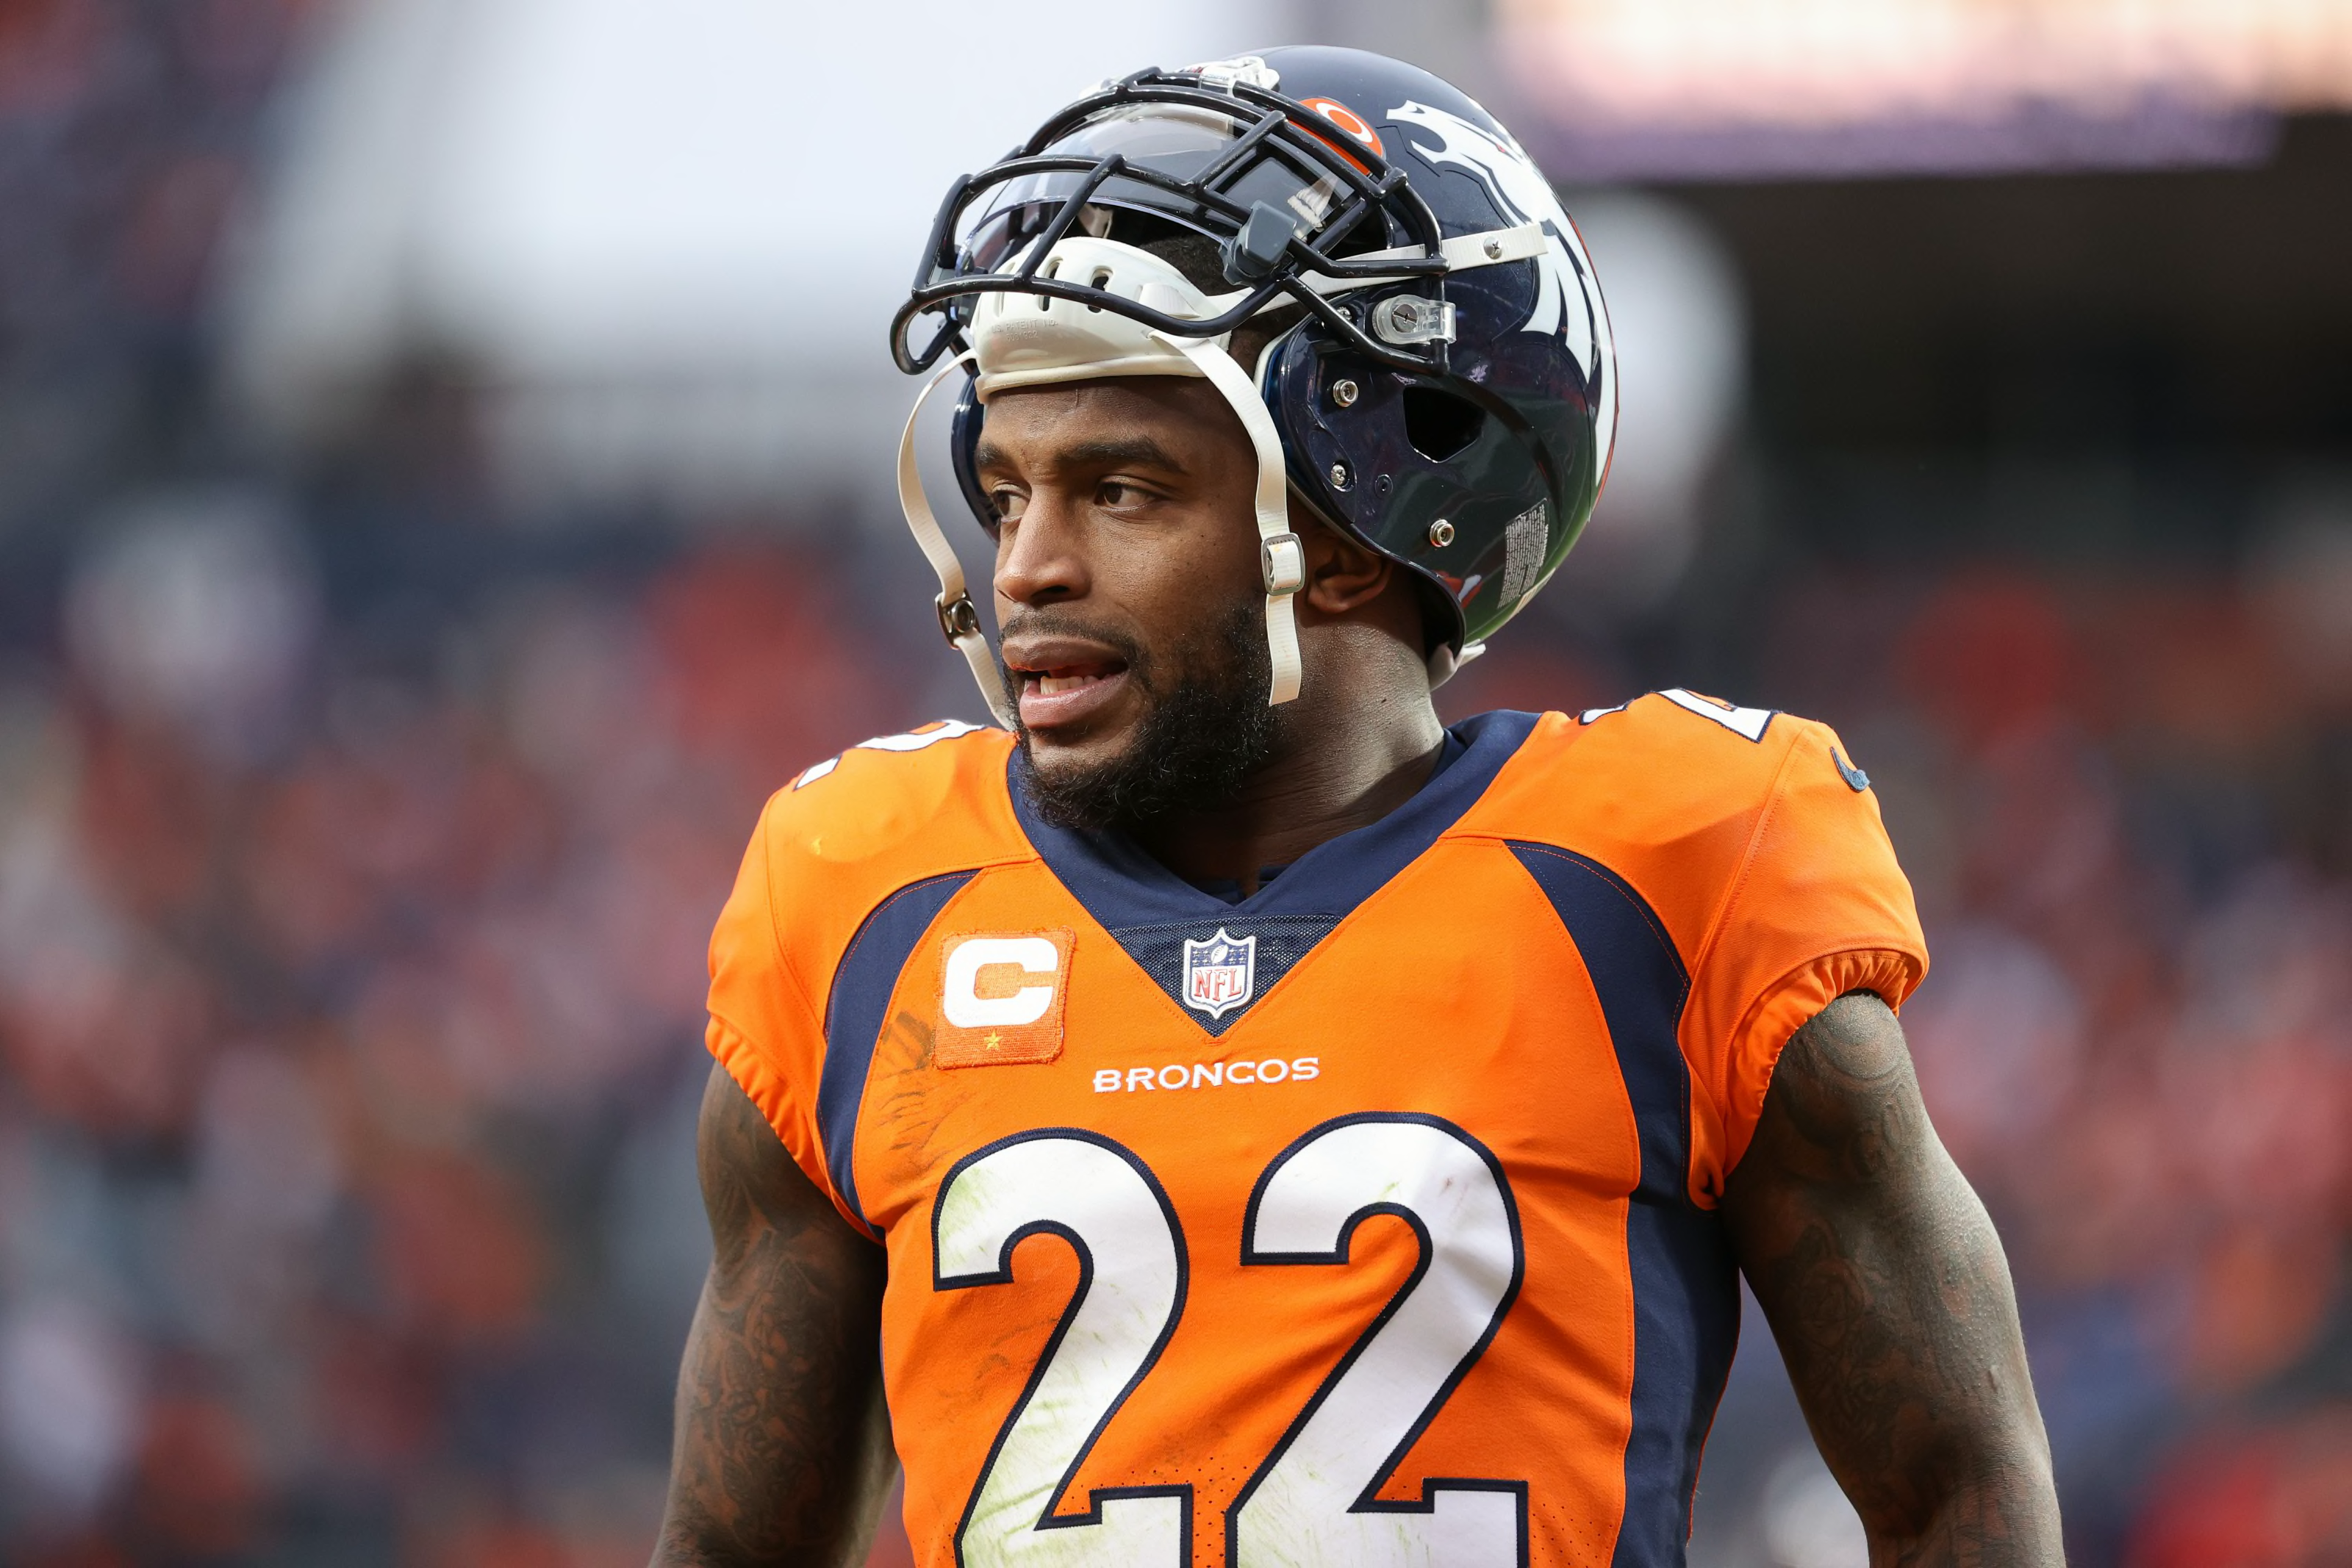 7 Denver Broncos players who could be gone in 2022 - Page 5